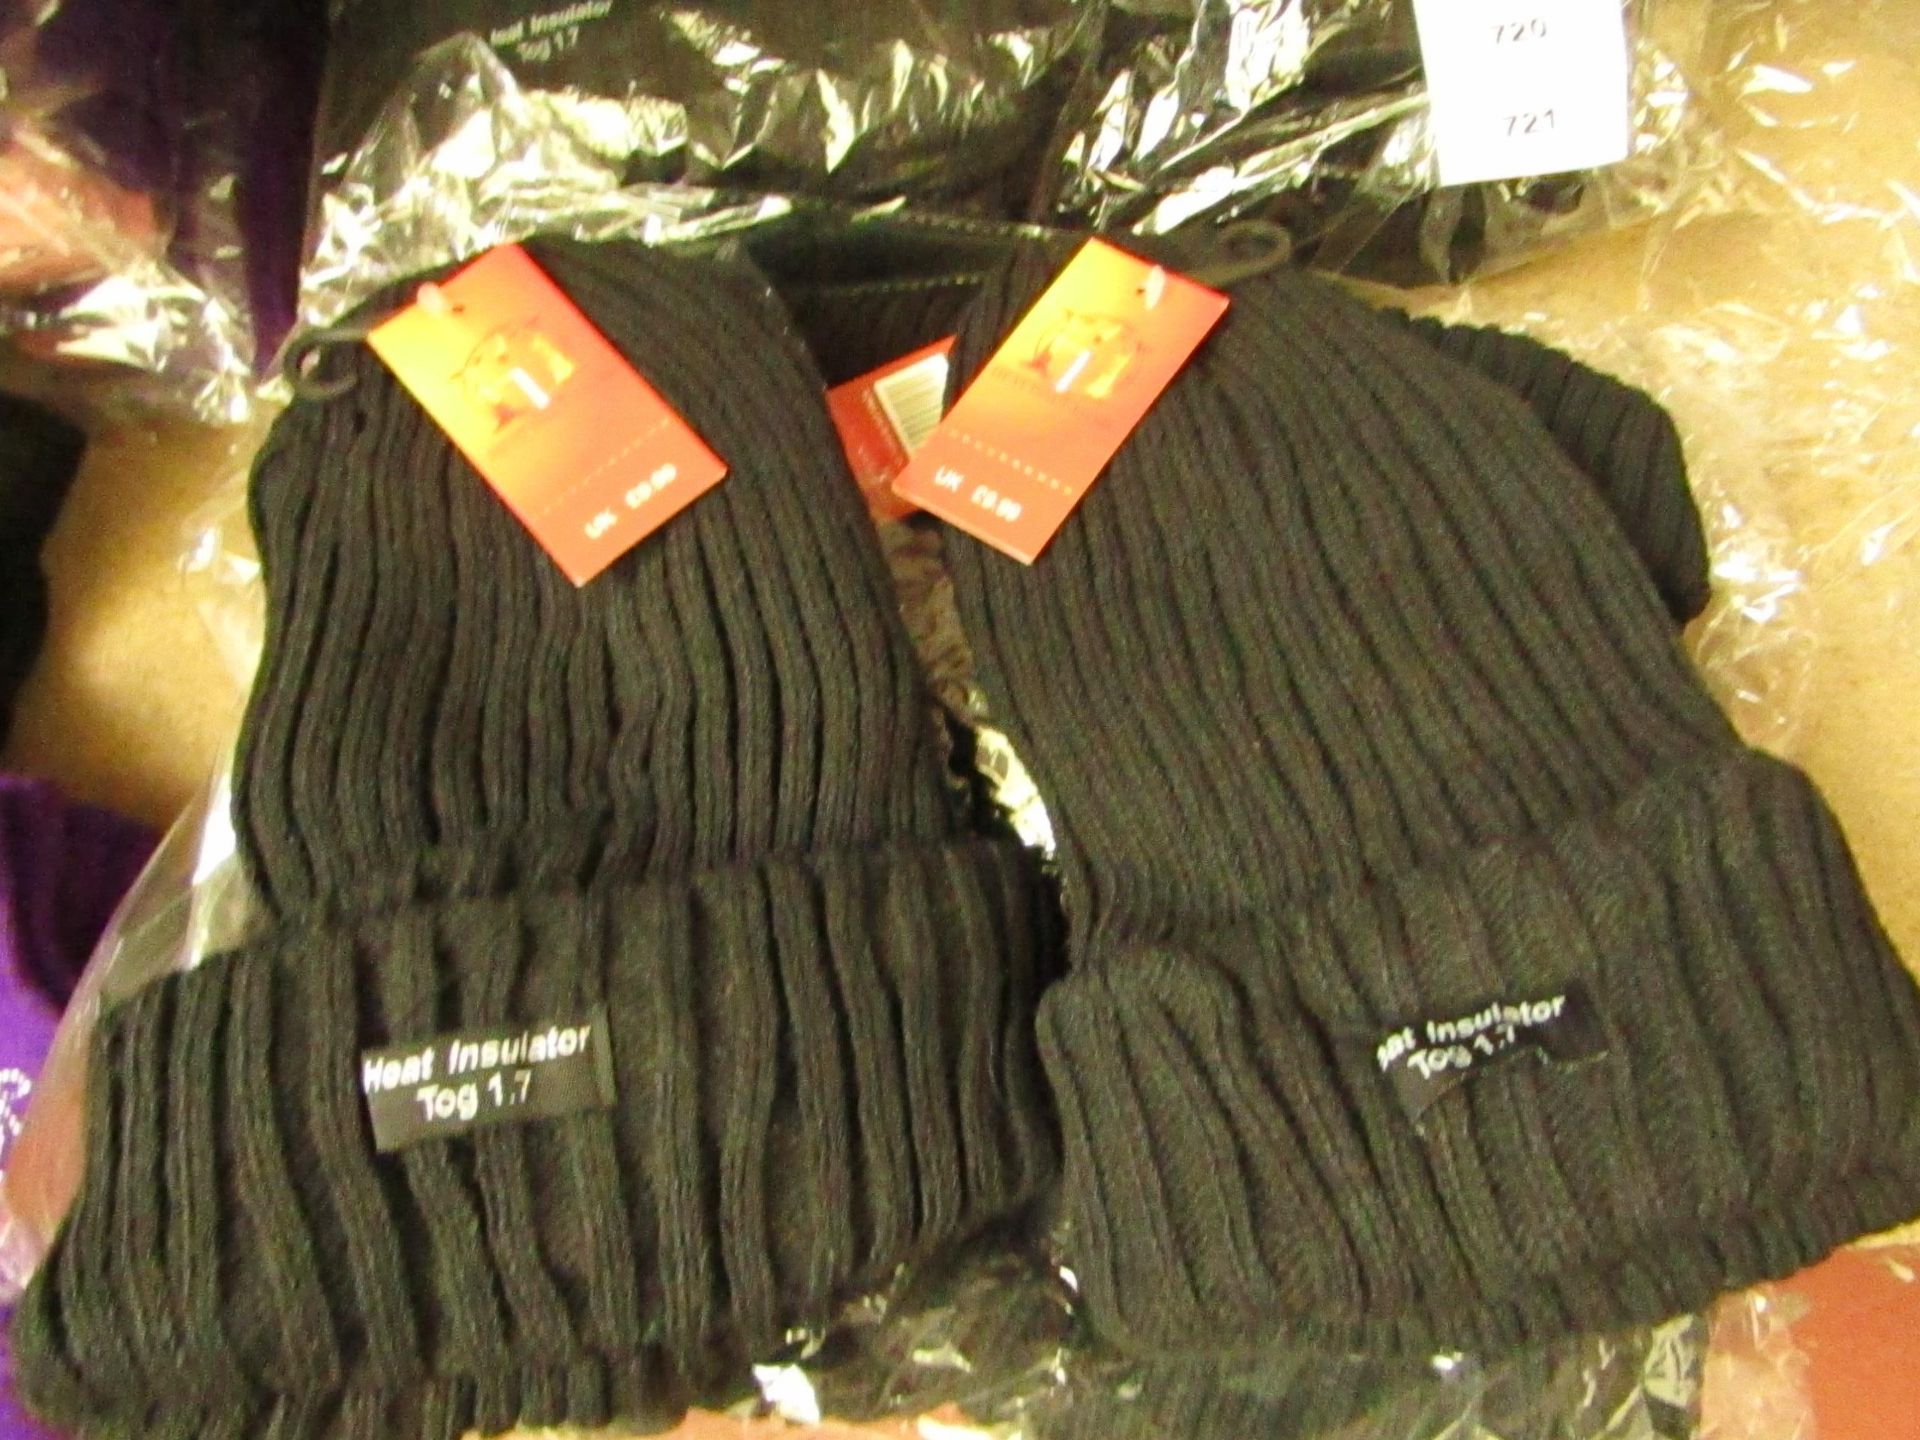 3 X Chunky Knit Fleece Lined Heat Insulate Tog 1.7 Hats RRP £9.99 each all new with tags